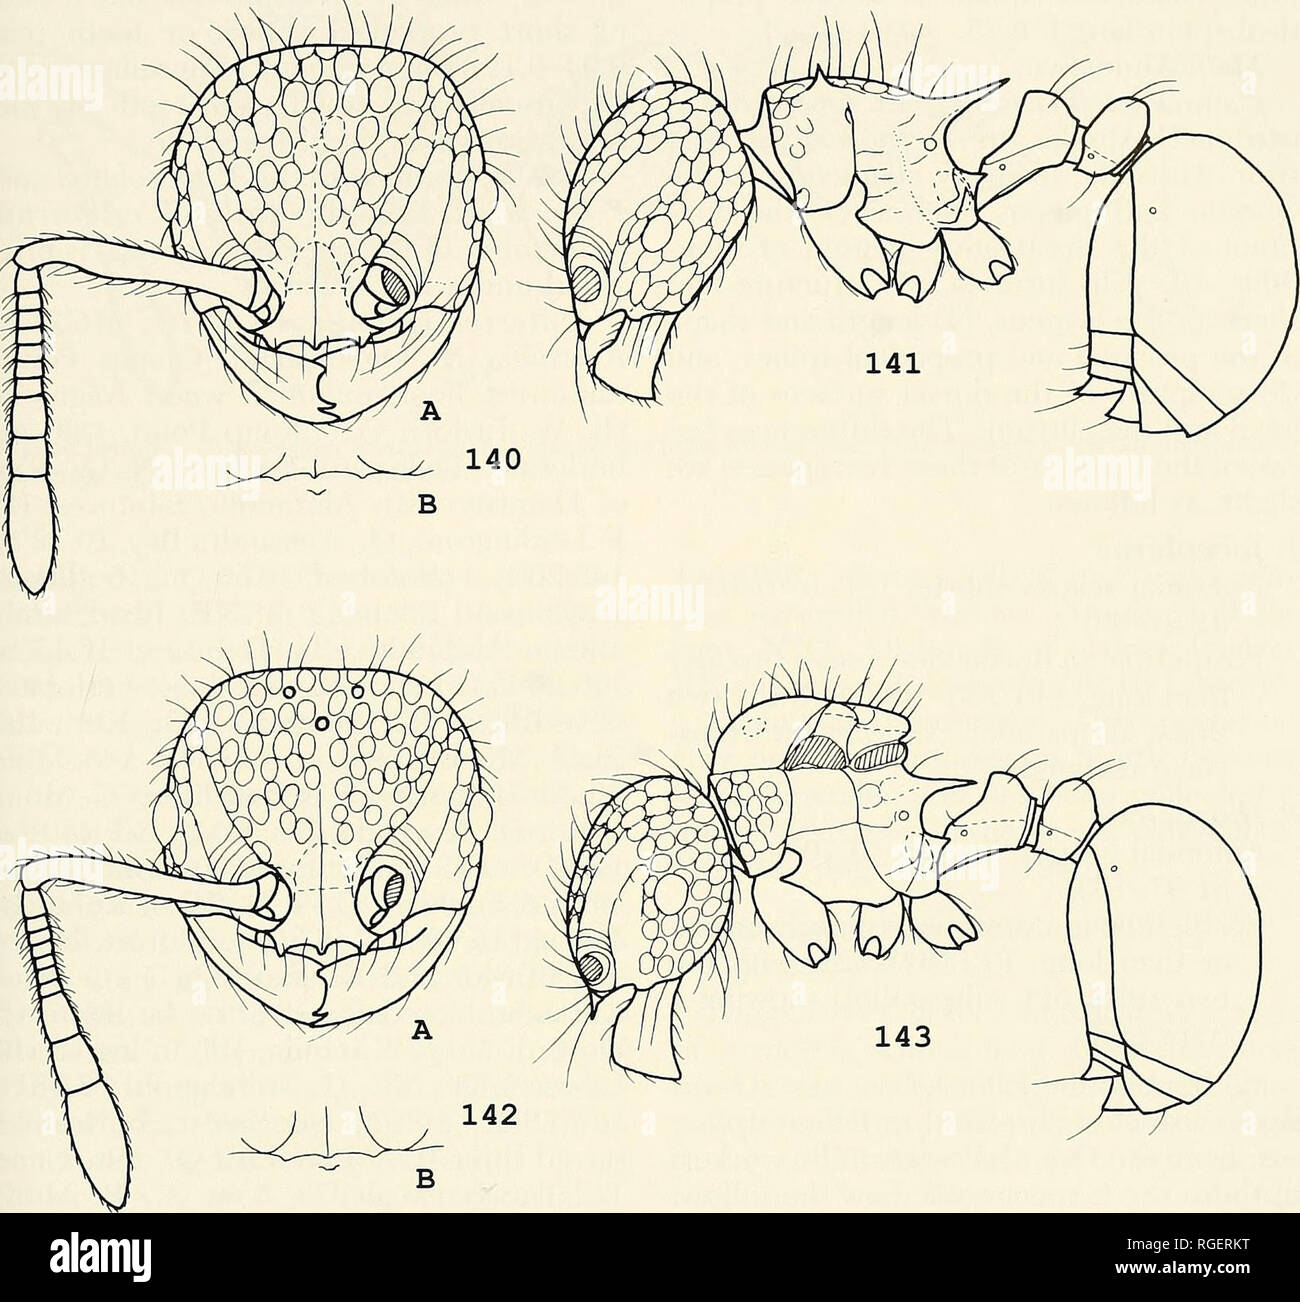 . Bulletin of the Museum of Comparative Zoology at Harvard College. Zoology. Revision of the Ant Genus PmsTOMYRMEX'Wmig 447. Figures 140-143. Pristomyrmex foveolatus Taylor. 140A: Worker head, full-face view; 140B: Showing a toothlike prominence on the center of ventral clypeus; 141: Worker, lateral view; 142A: Queen head, full-face view; 142B: Showing a toothlike prom- inence on the center of ventral clypeus; 143: Queen, lateral view. pronotum with a few foveolate punctures; sides of the rest of aUtrunk with some ir- regularly superficial rugae. Petiole node and postpetiole smooth and shining Stock Photo